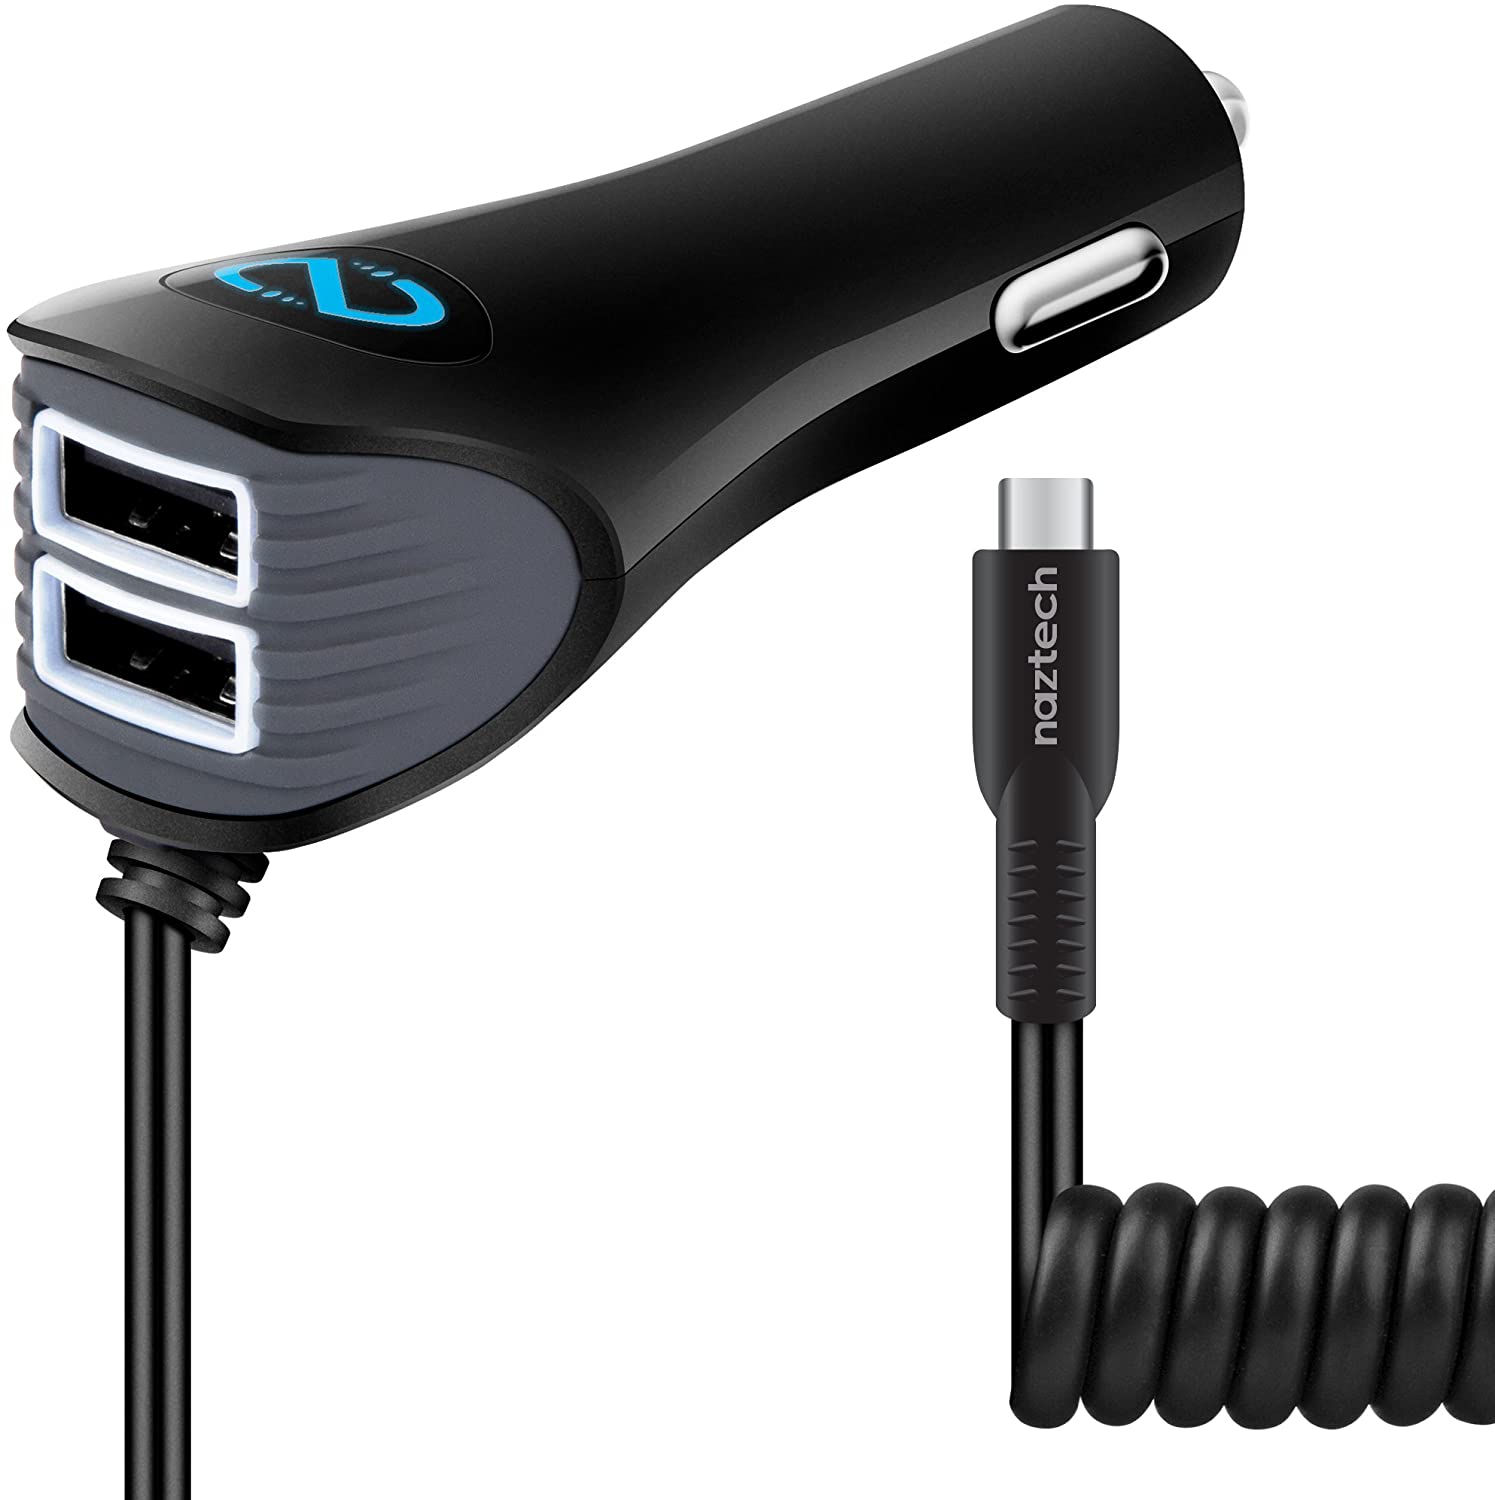 Naztech Corded USB-C TRiO Car Charger (Black)